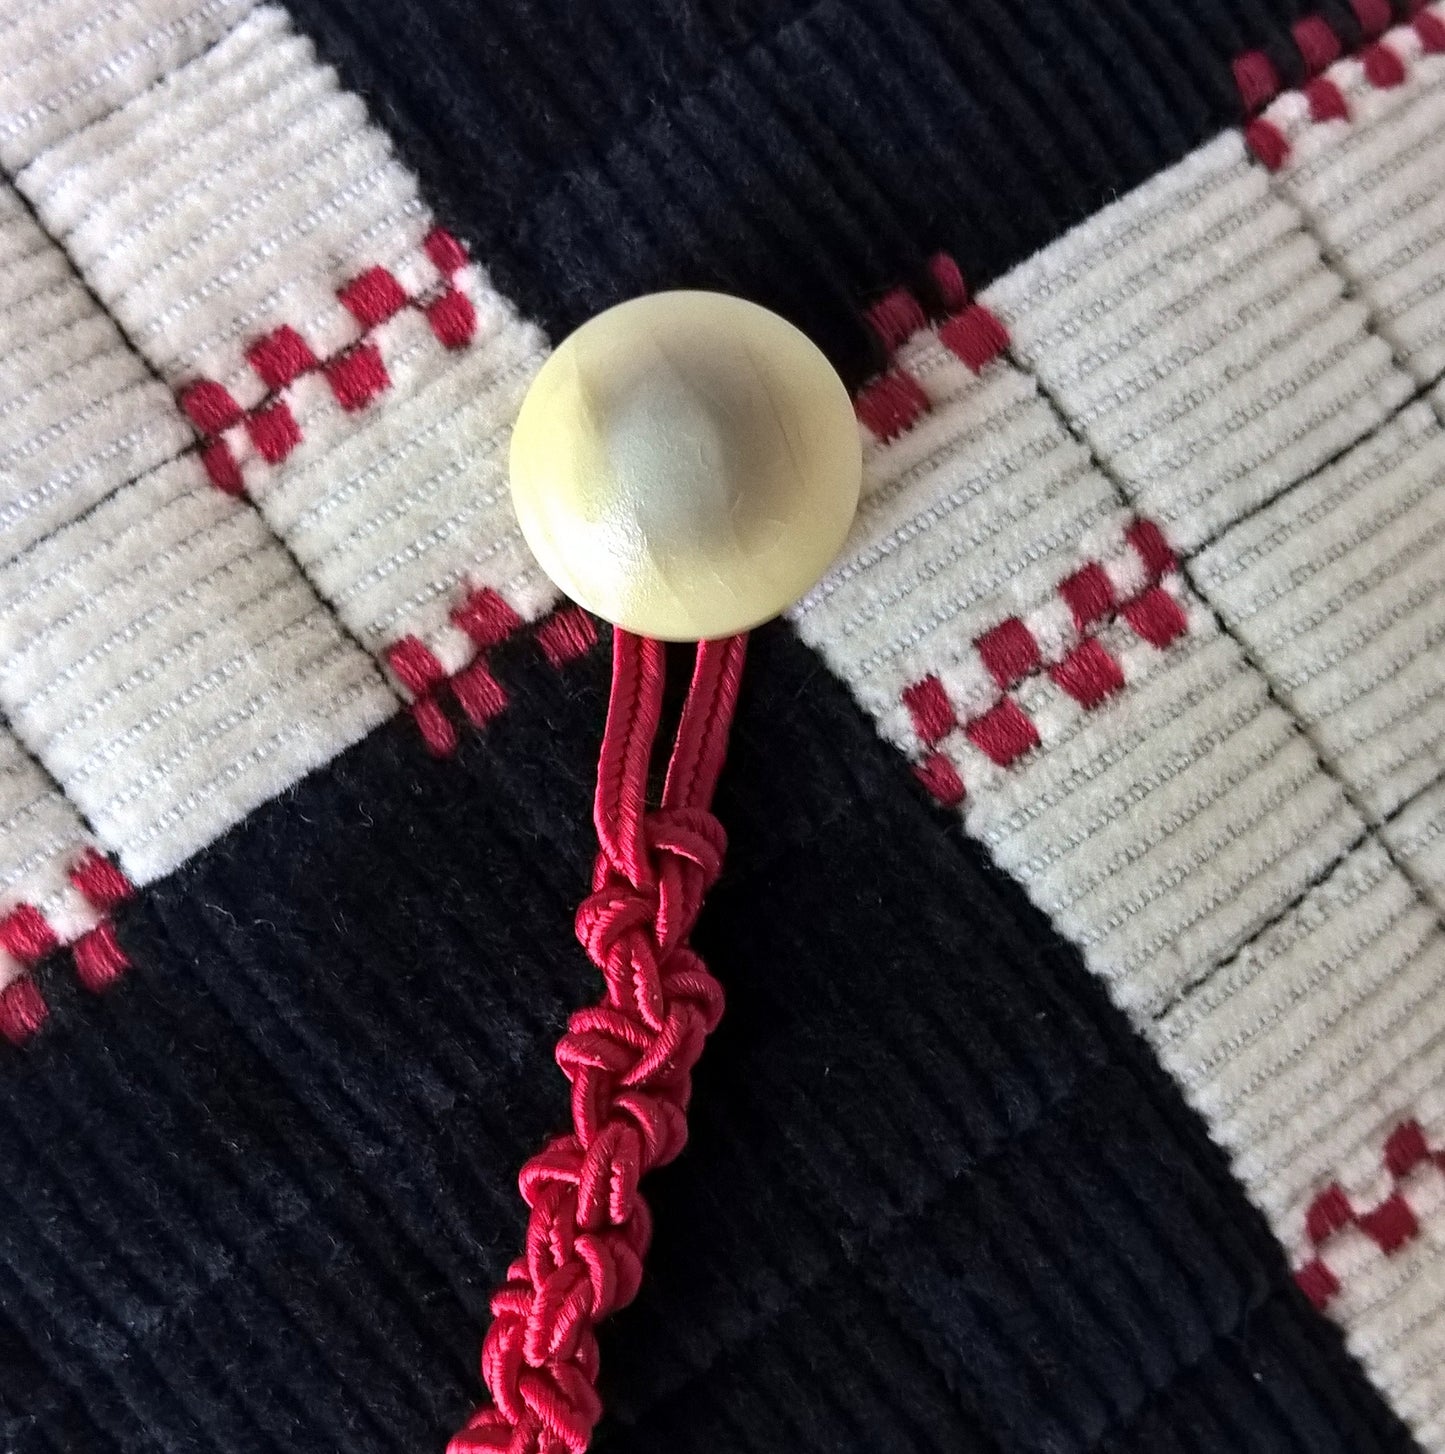 The smoking cap is finished with an unusual vintage button in cream